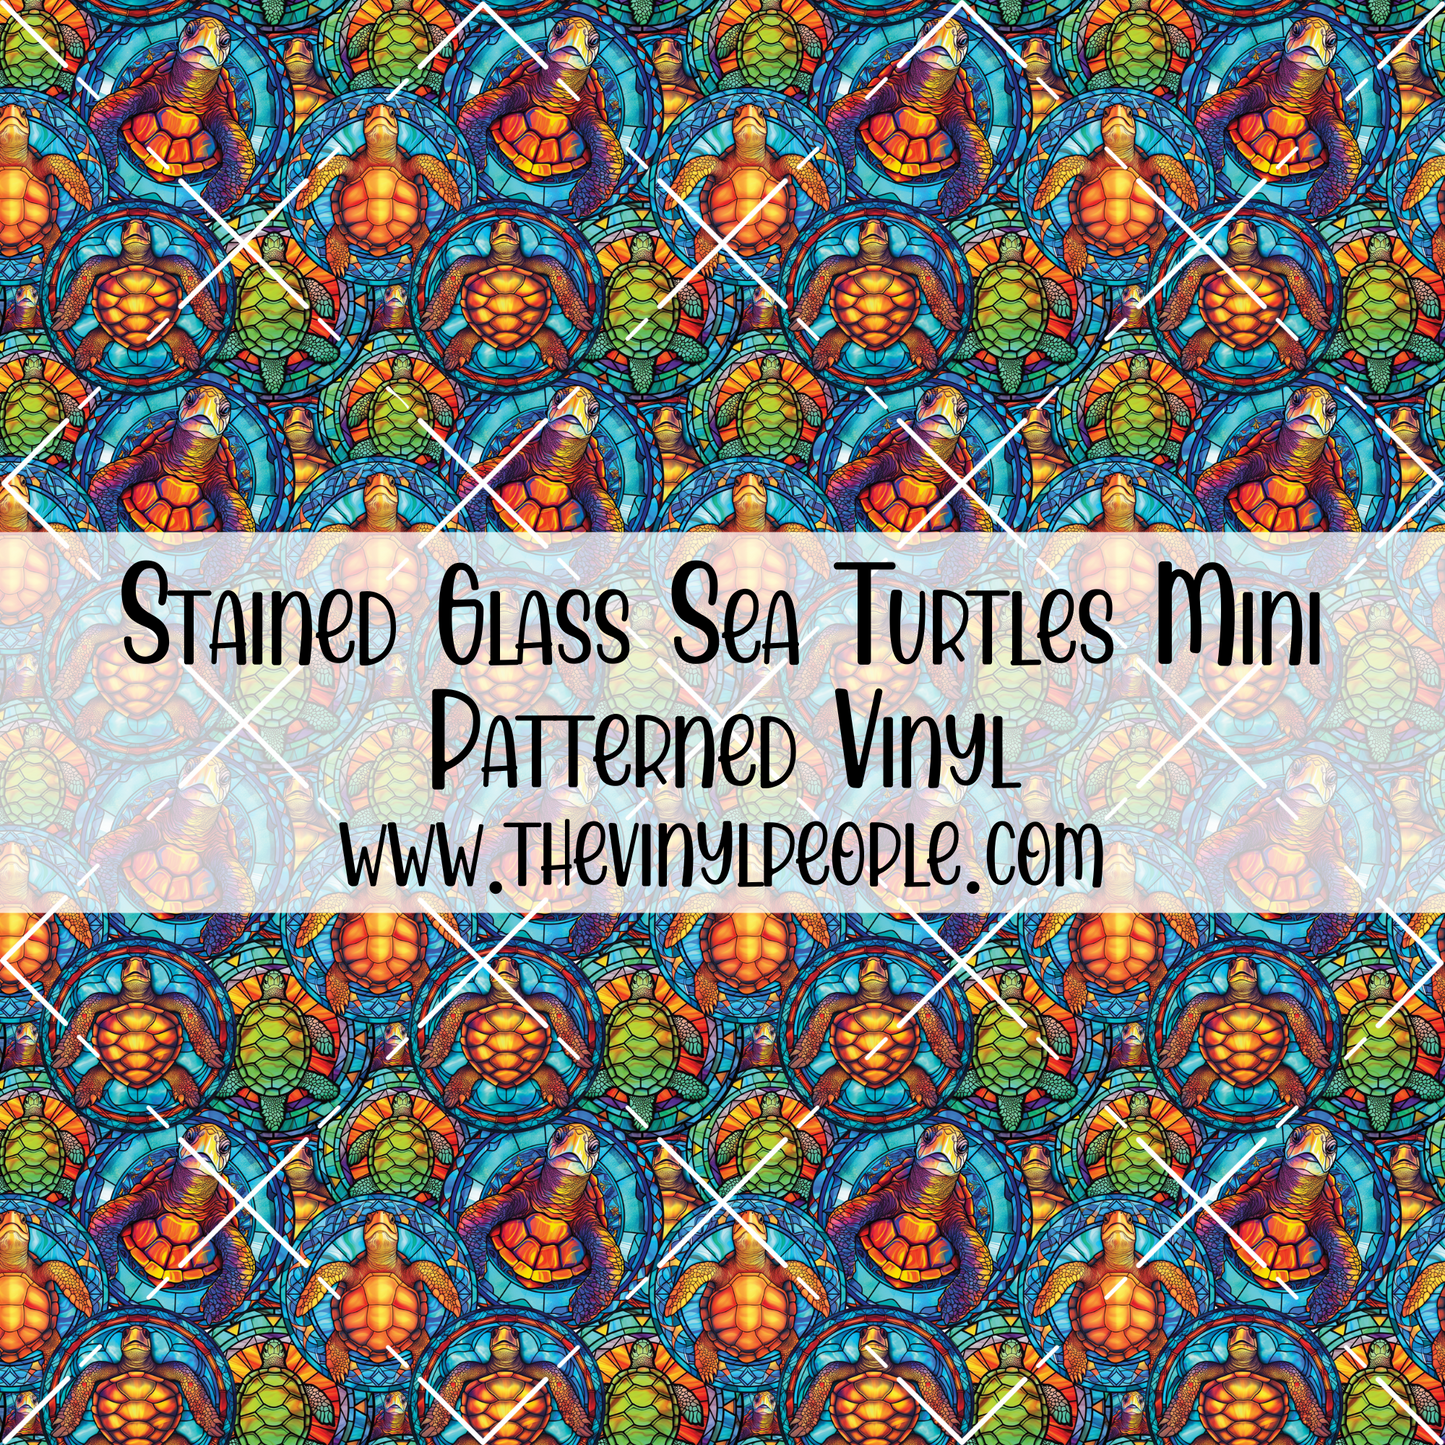 Stained Glass Sea Turtles Patterned Vinyl